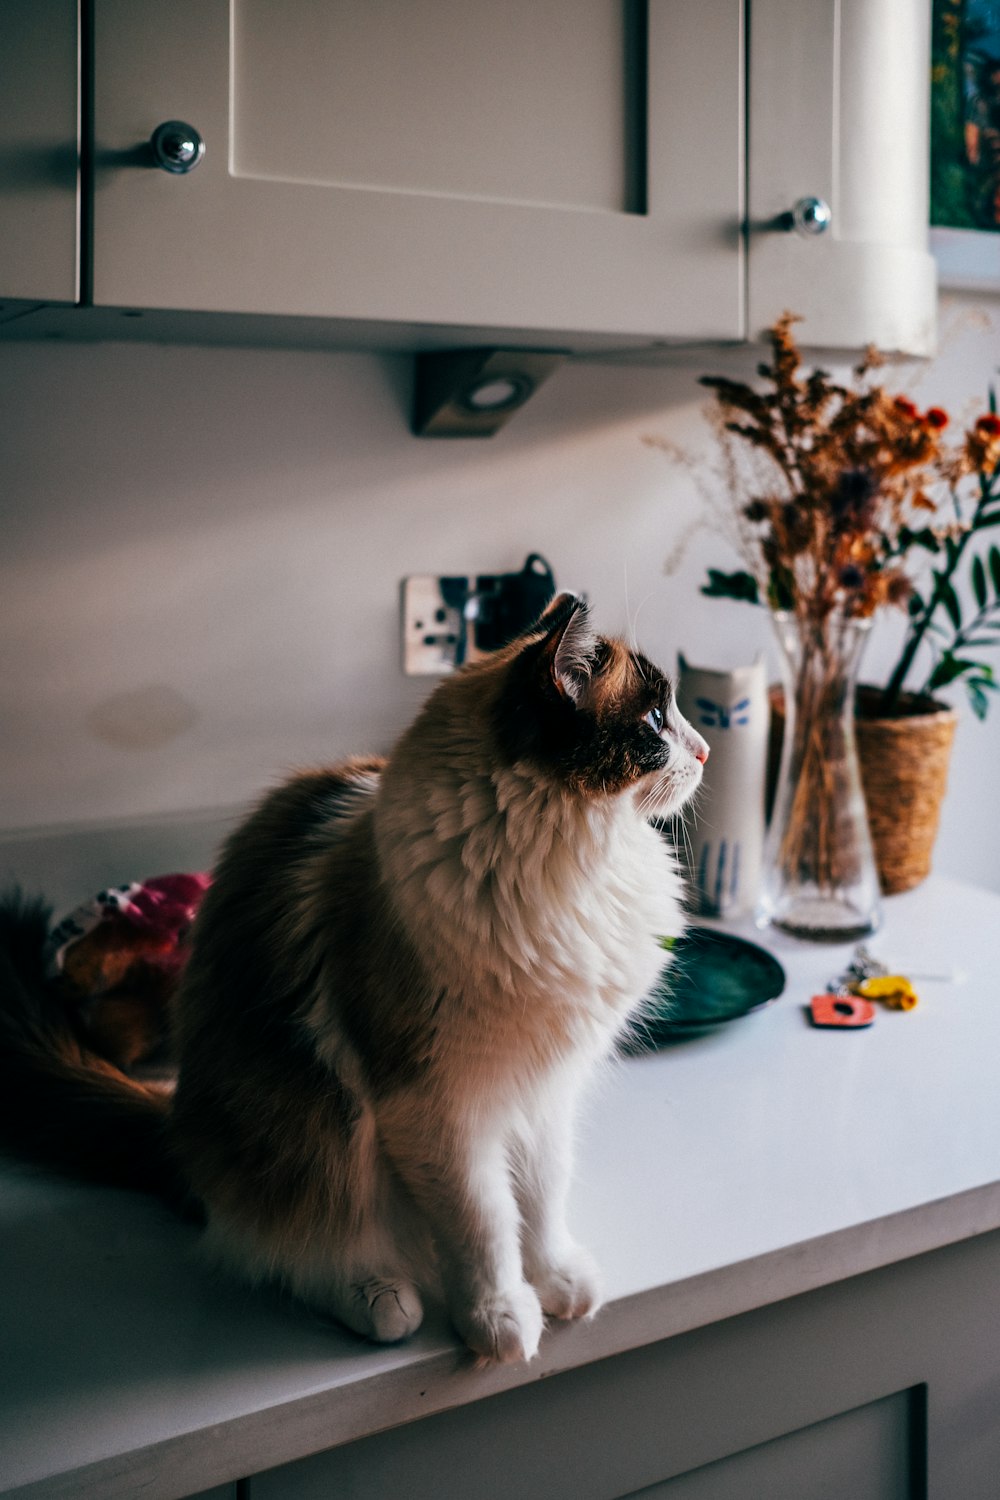 a cat sitting on a kitchen counter next to a vase of flowers